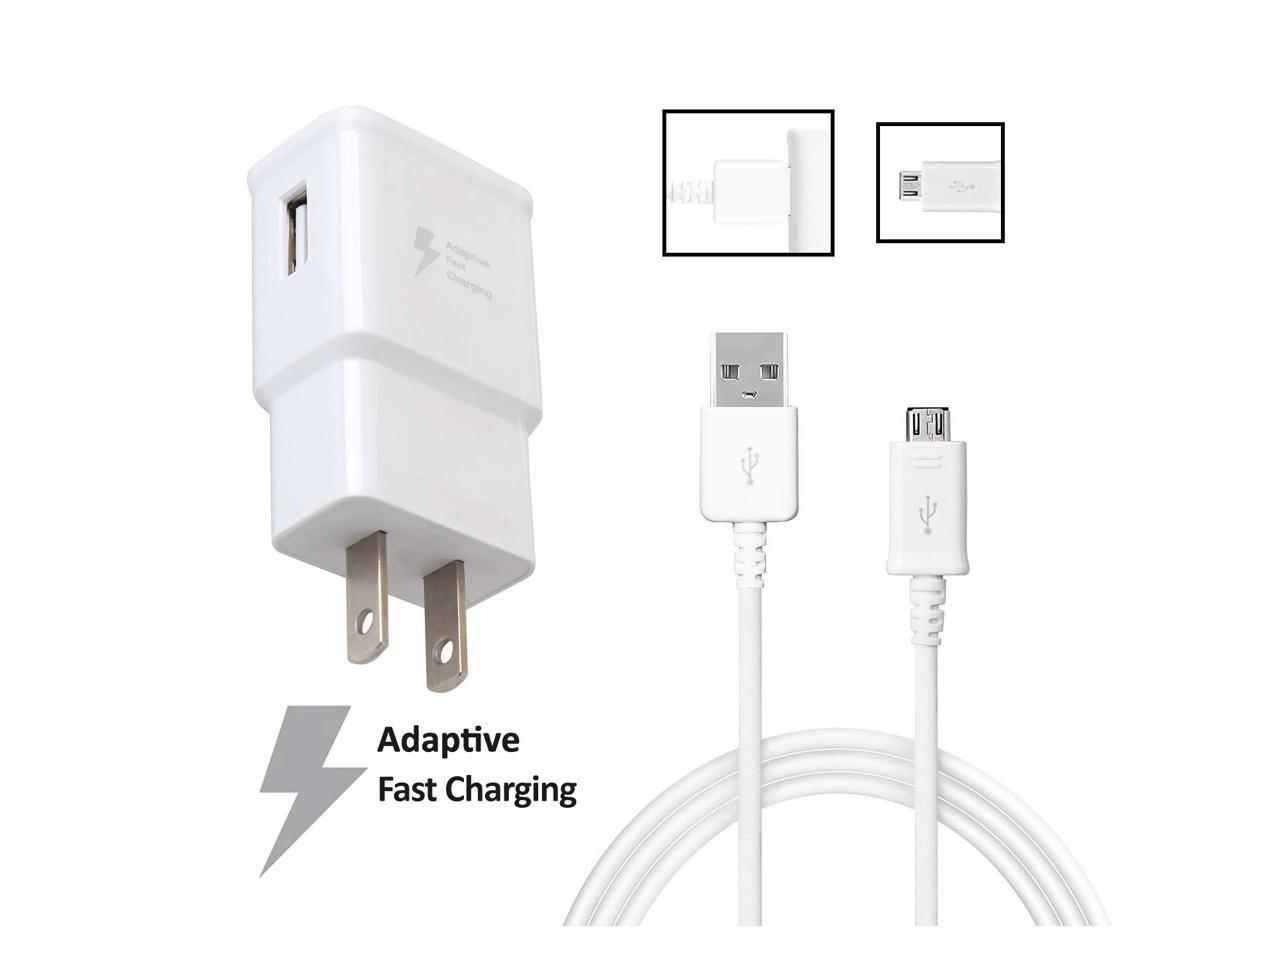 5 Pack Oem Quick Fast Charger For Samsung Galaxy A5 15 Old Model Cell Phones Wall Charger 5 Ft Micro Usb Cable Afc Uses Dual Voltages For Up To 50 Faster Charging Bulk